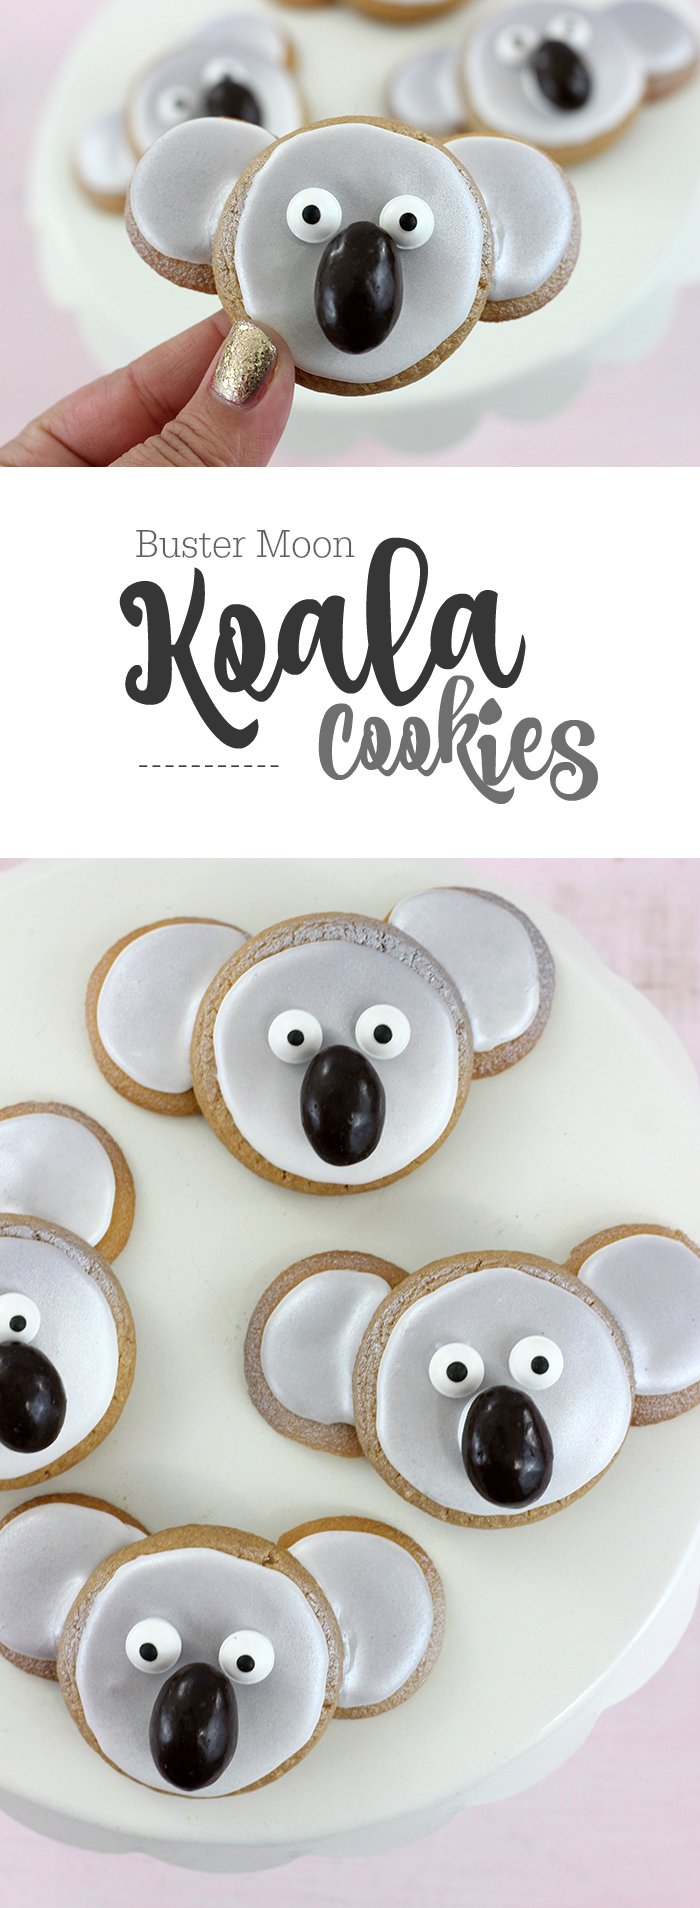 Koala Cookies! Just in time to celebrate the upcoming SING Movie. In theaters on 12/21..